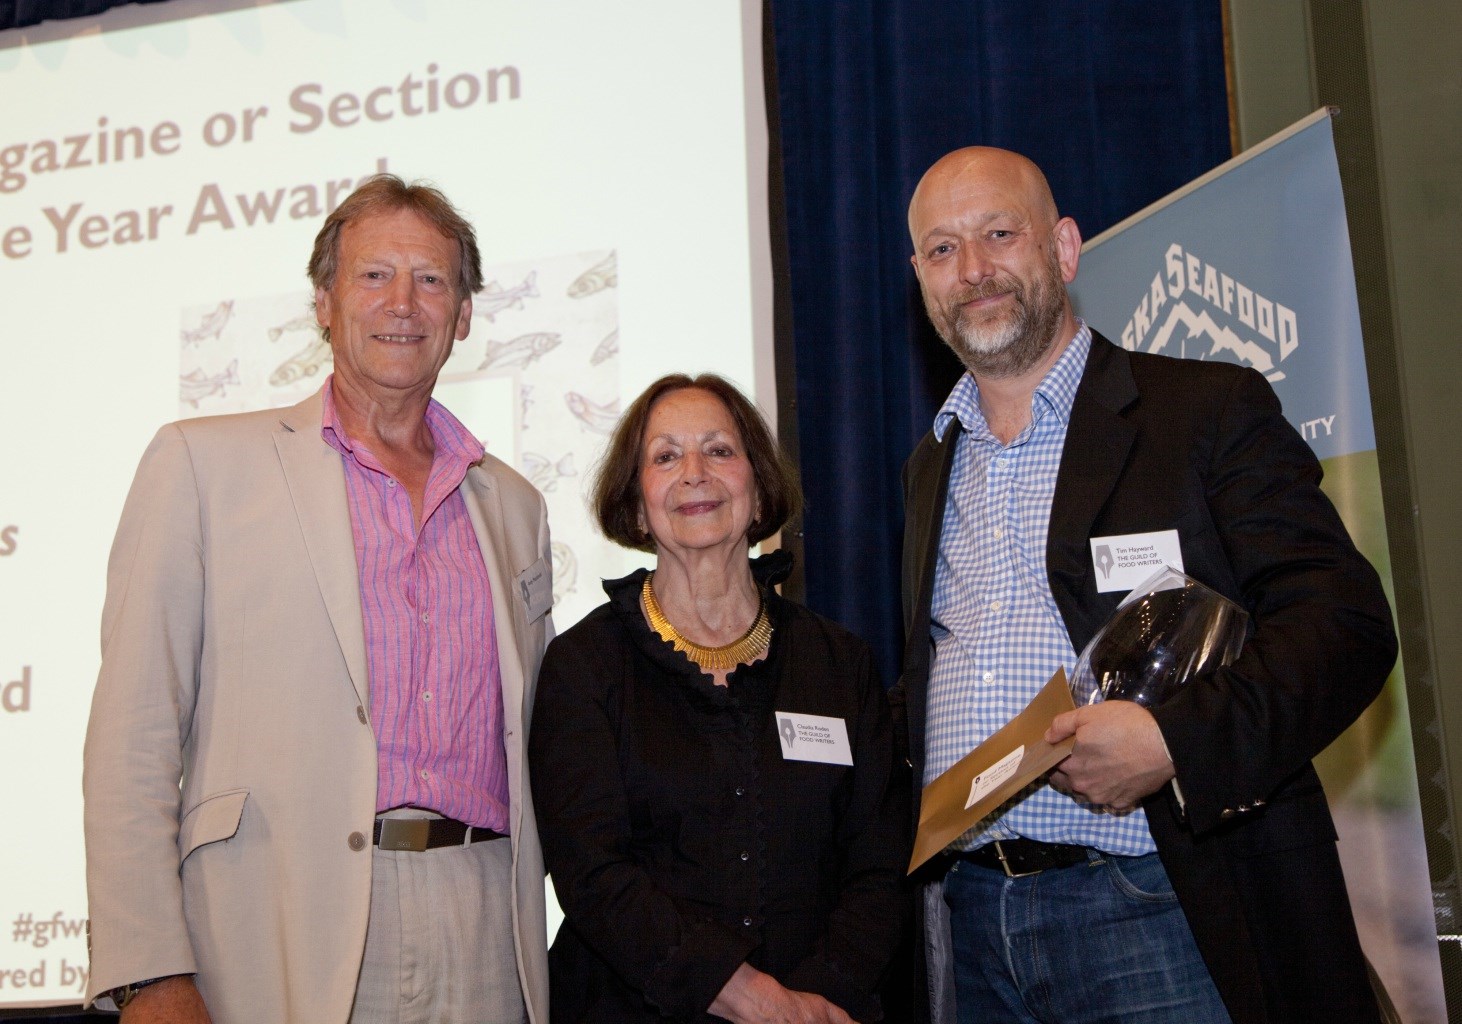 Coregeo’s Managing Director, Andy Macdonald (left) and Claudia Roden presenting Tim Hayward with the Food Magazine or Section of the Year Award (sponsored by Tenderstem®)